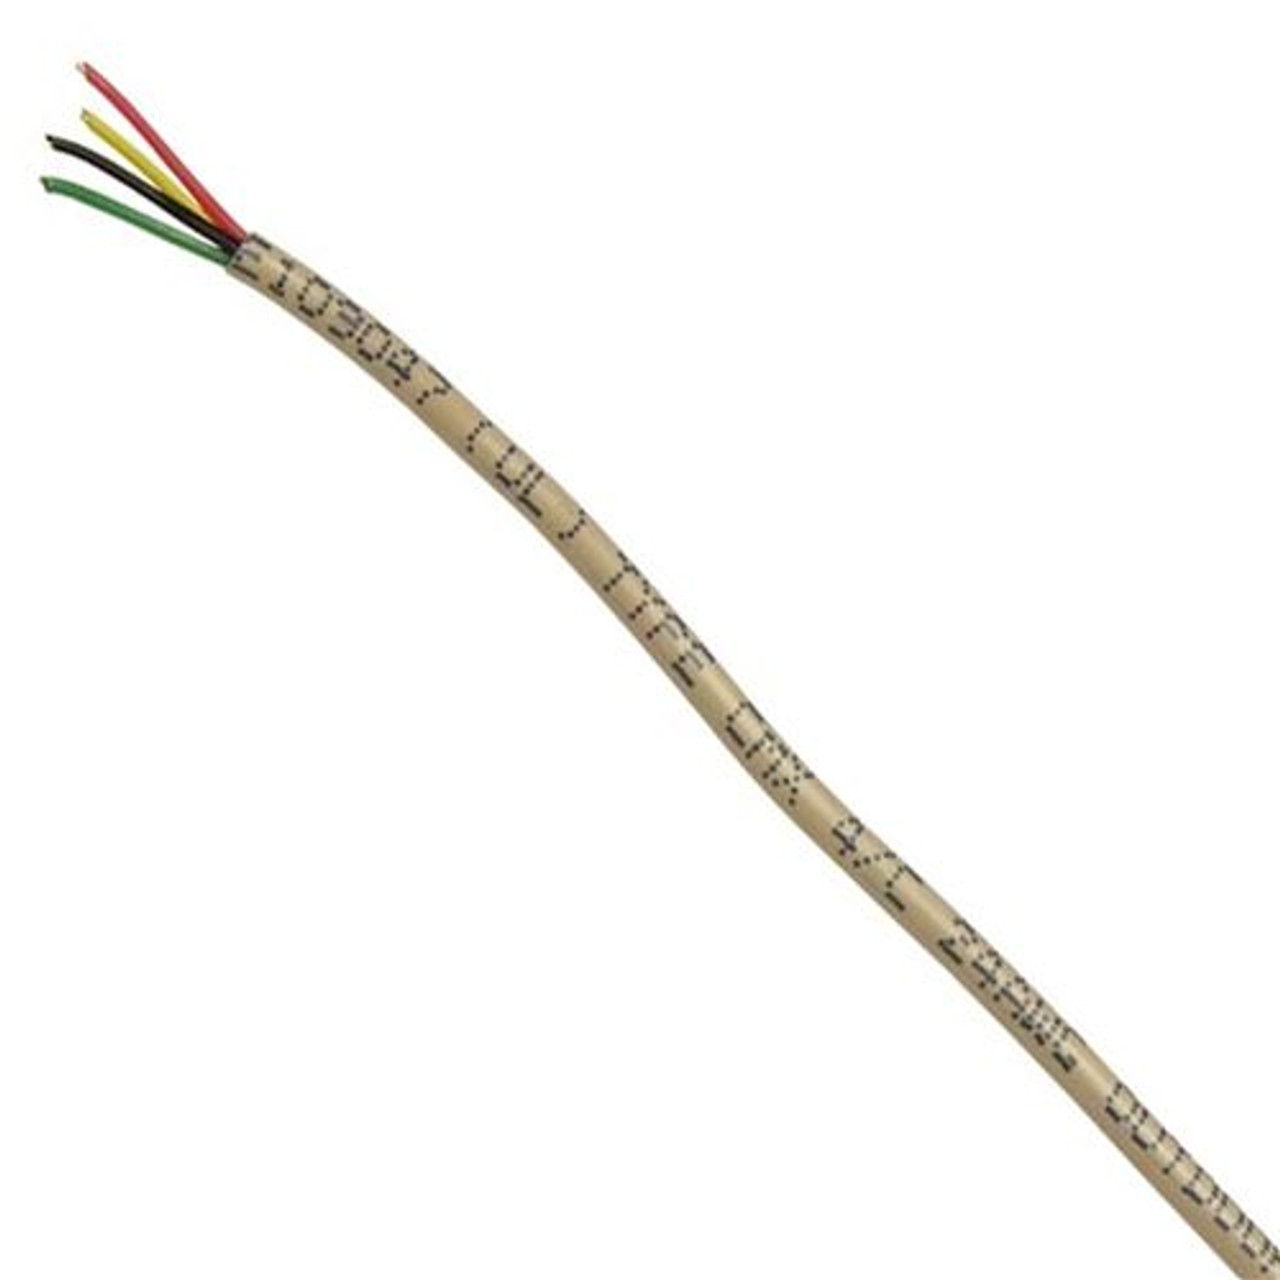 Eagle TWR-500 Telephone Cable 500' FT Round Bulk Station Wire Solid 4 Conductor 24 Copper Gauge Modular Telephone Line Cord Cable Beige Data Signal Jack Hook-Up Wire, No Connectors, Part # TWR-500RND